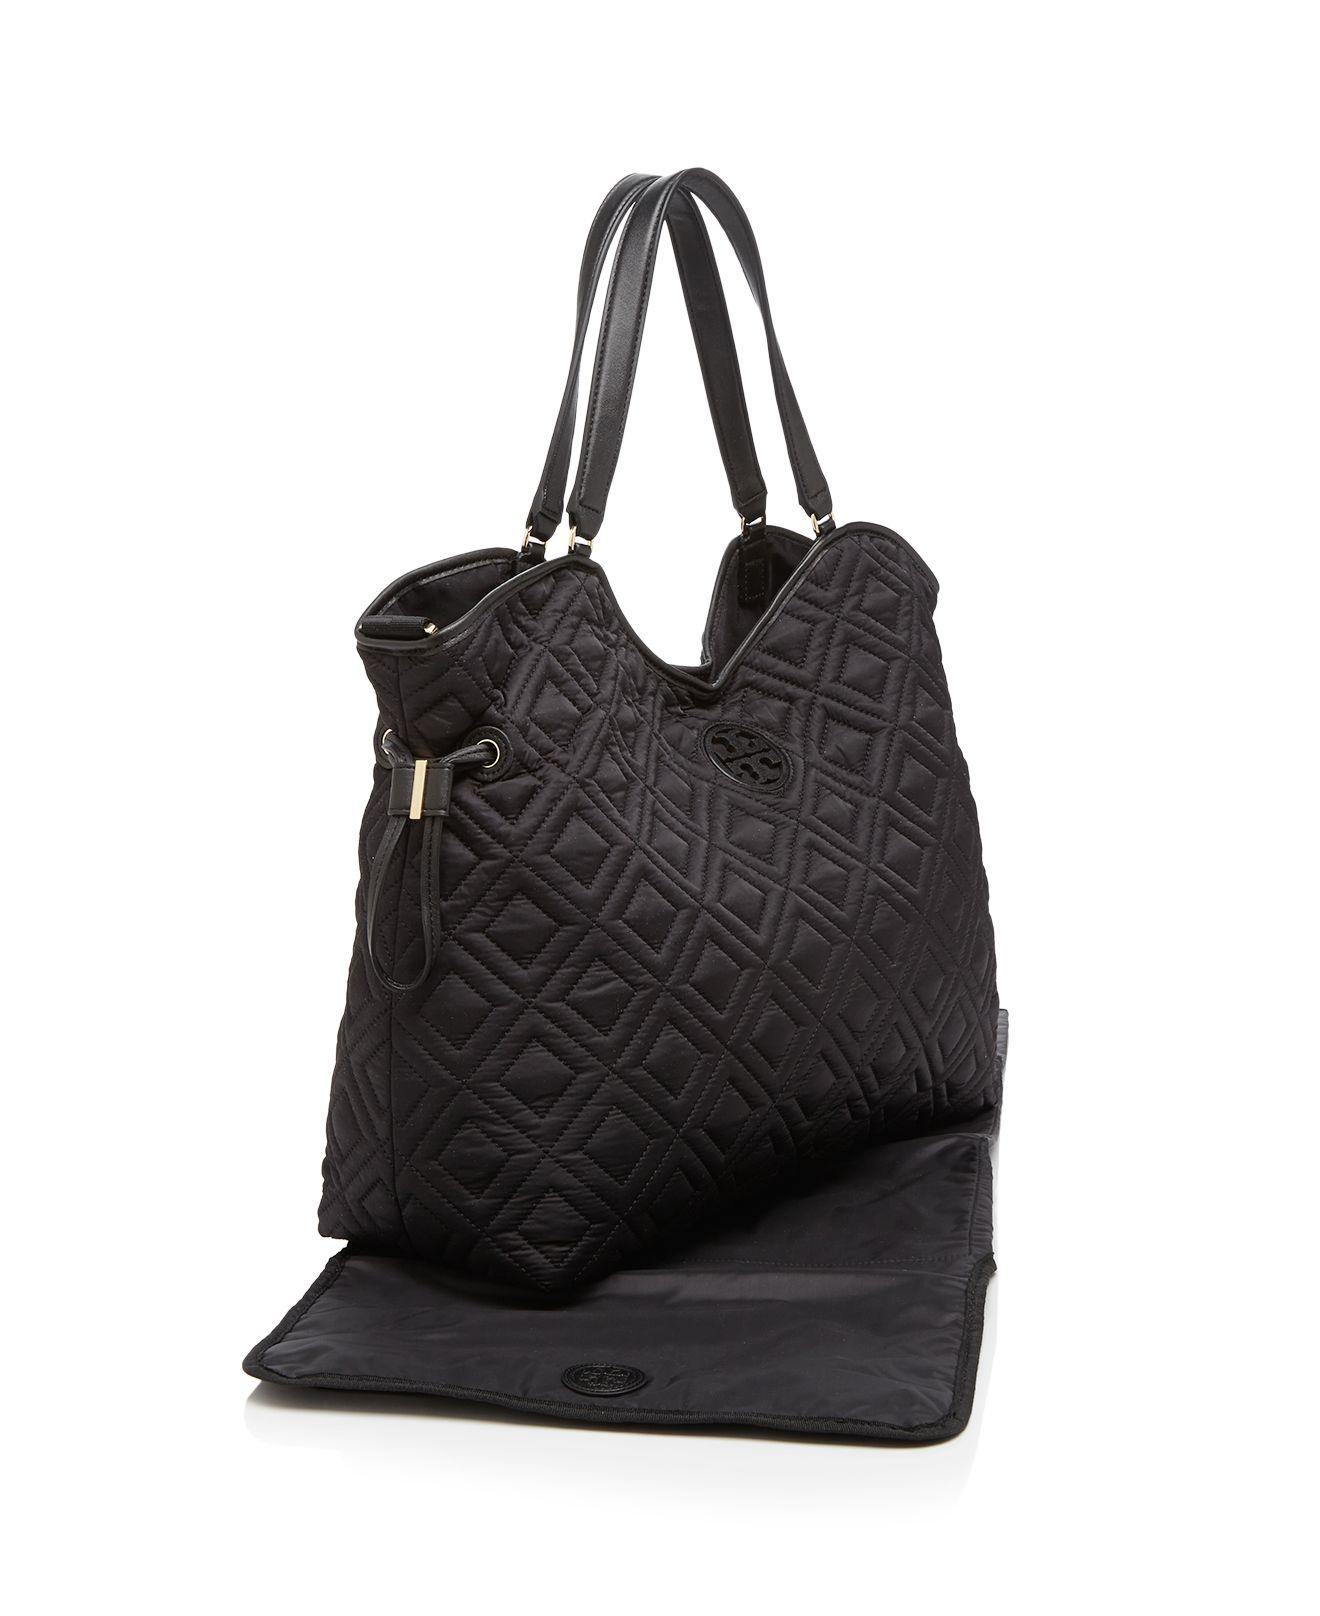 Tory Burch Synthetic Diaper Bag - Quilted Slouchy in Black/Gold (Black) - Lyst